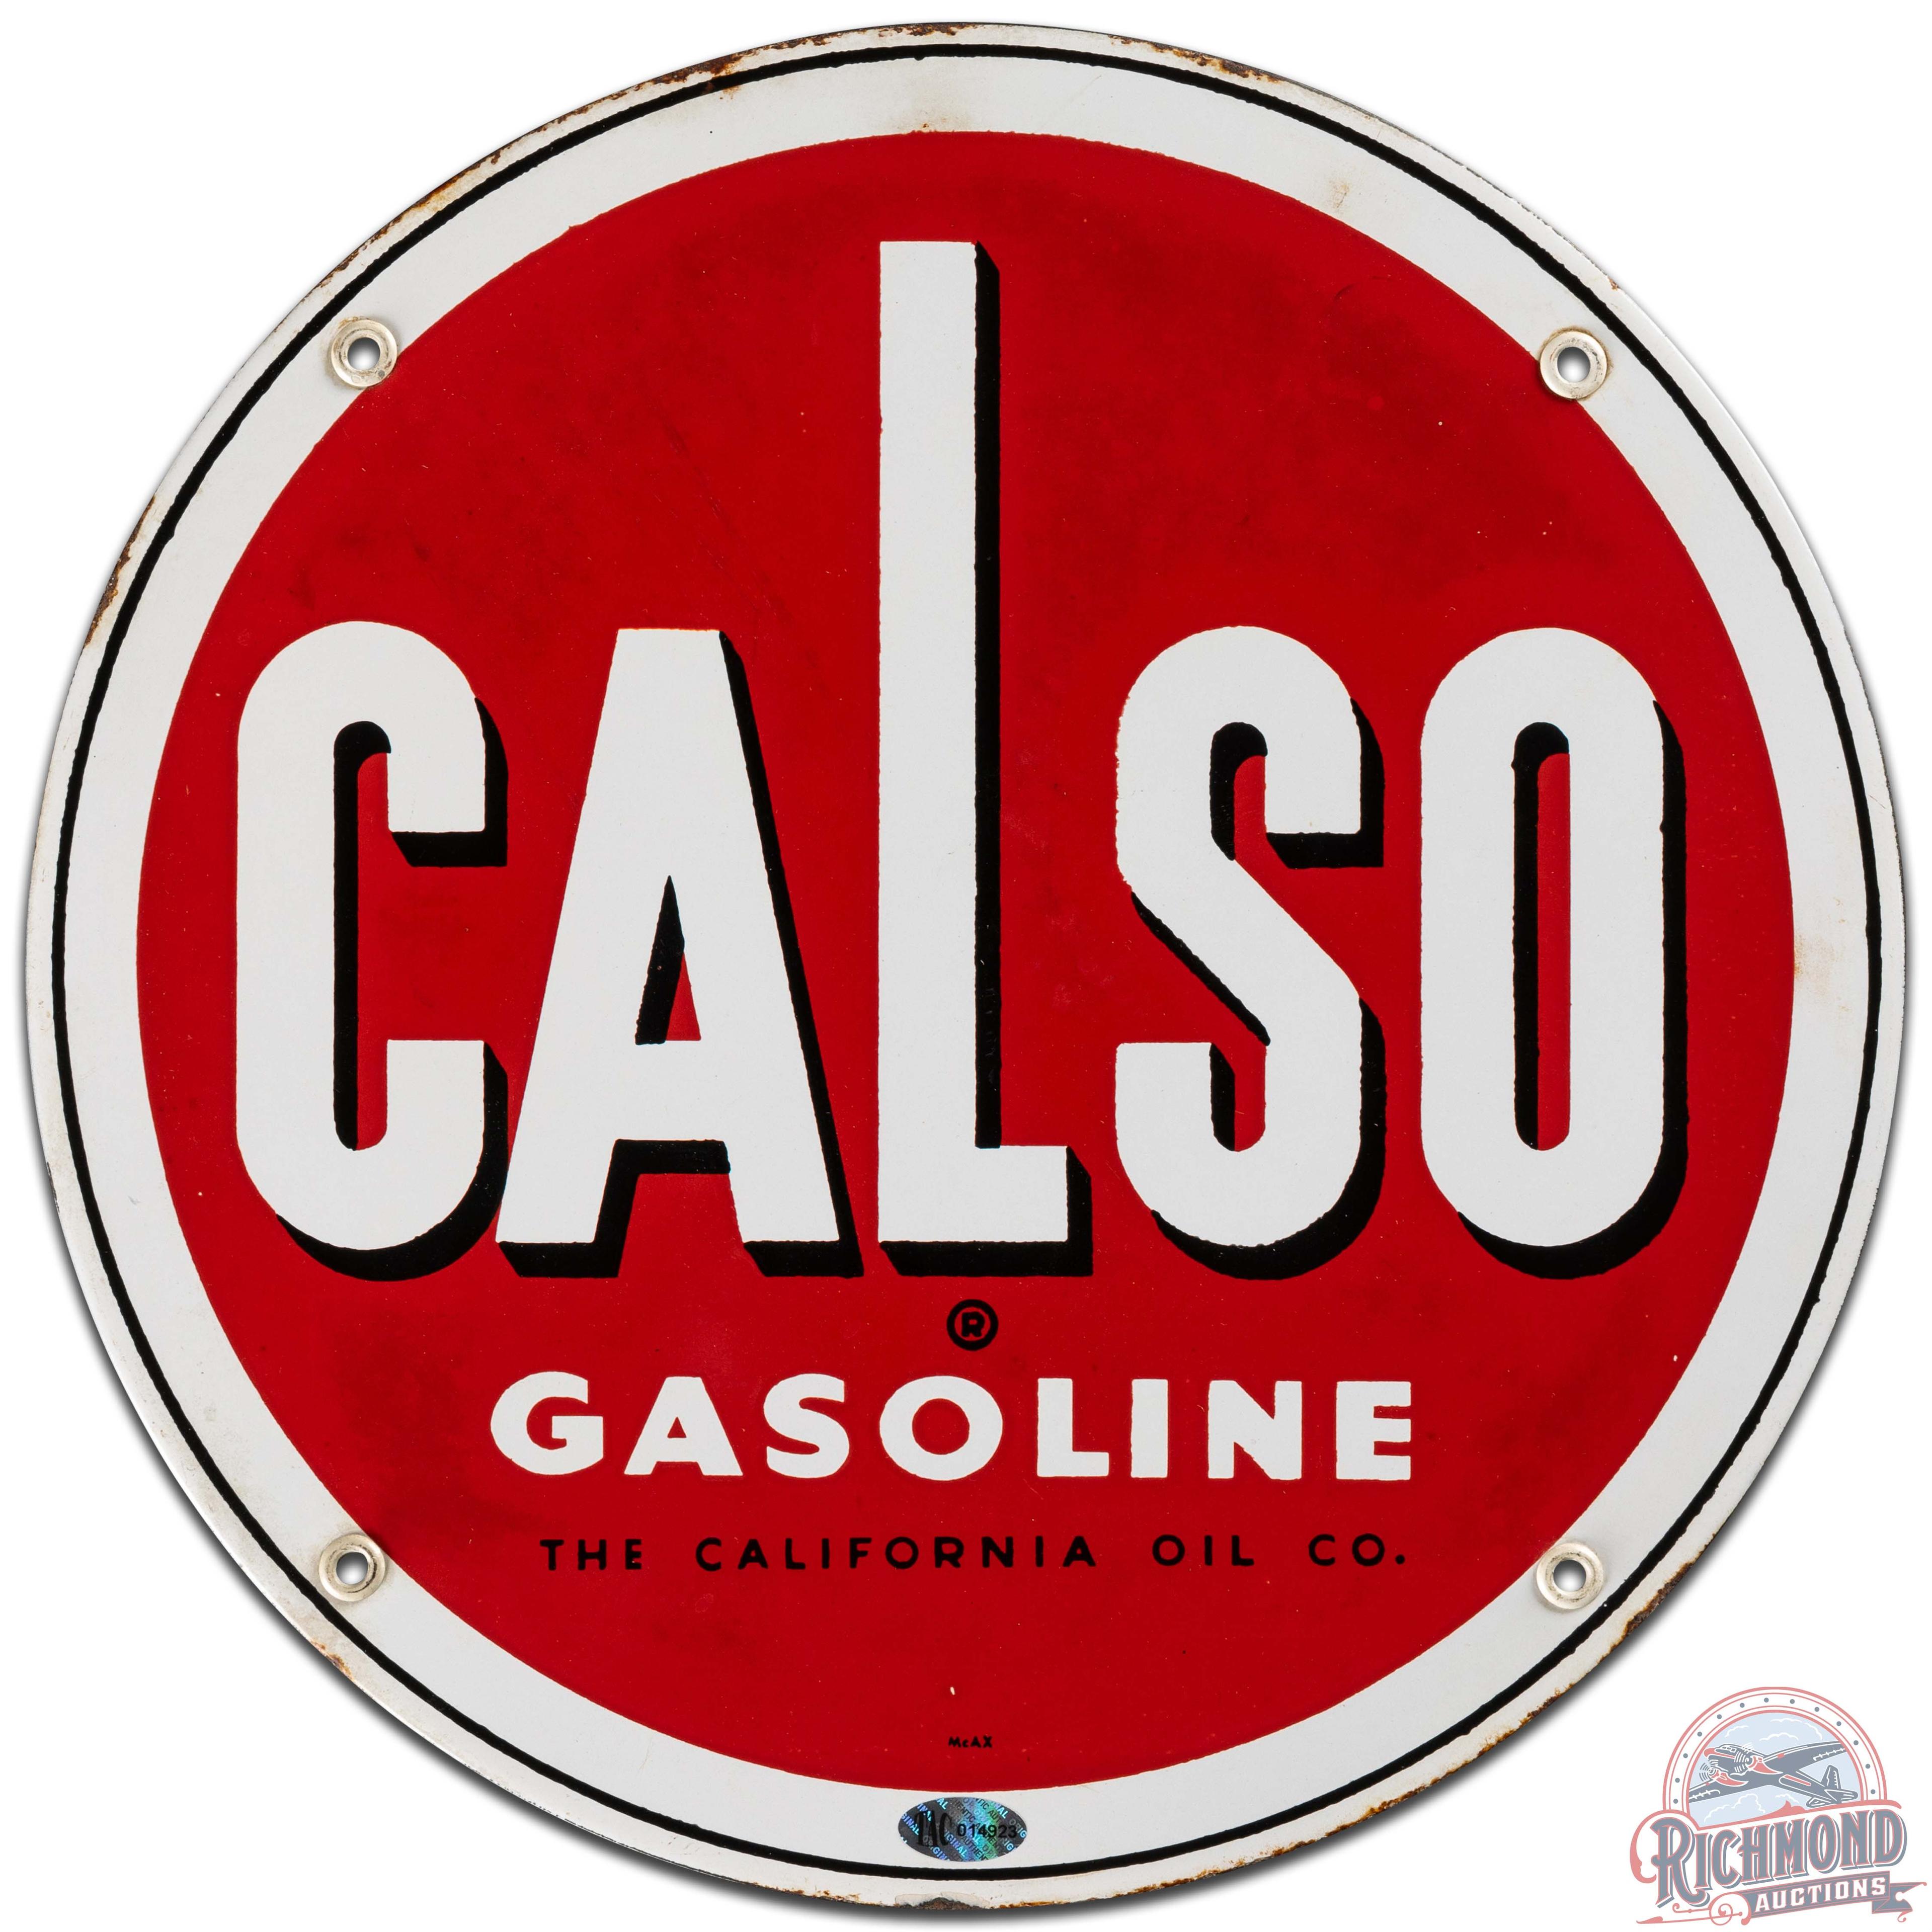 Calso Gasoline California Oil Co. SS Porcelain Gas Pump Plate Sign